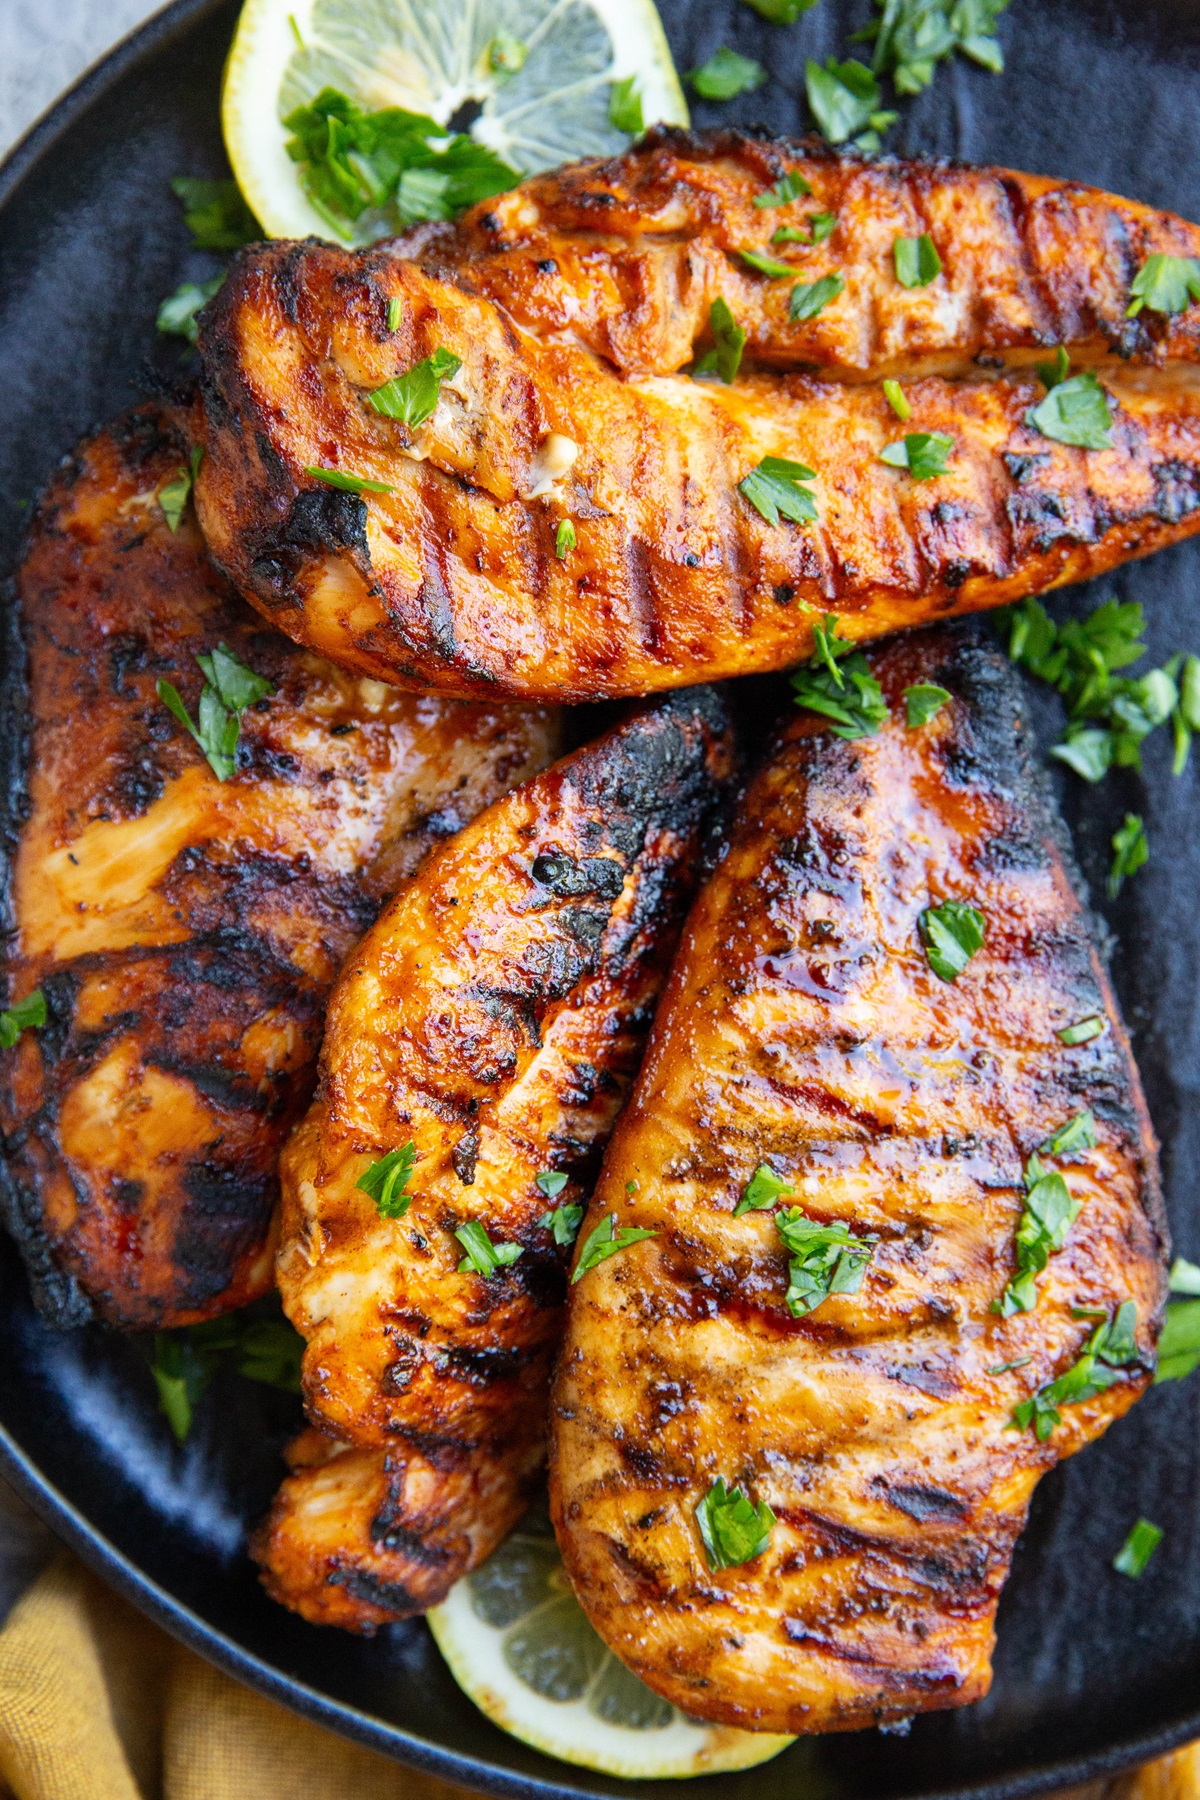 Black plate with four grilled chicken breasts sprinkled with parsley and slices of lemon to the side.